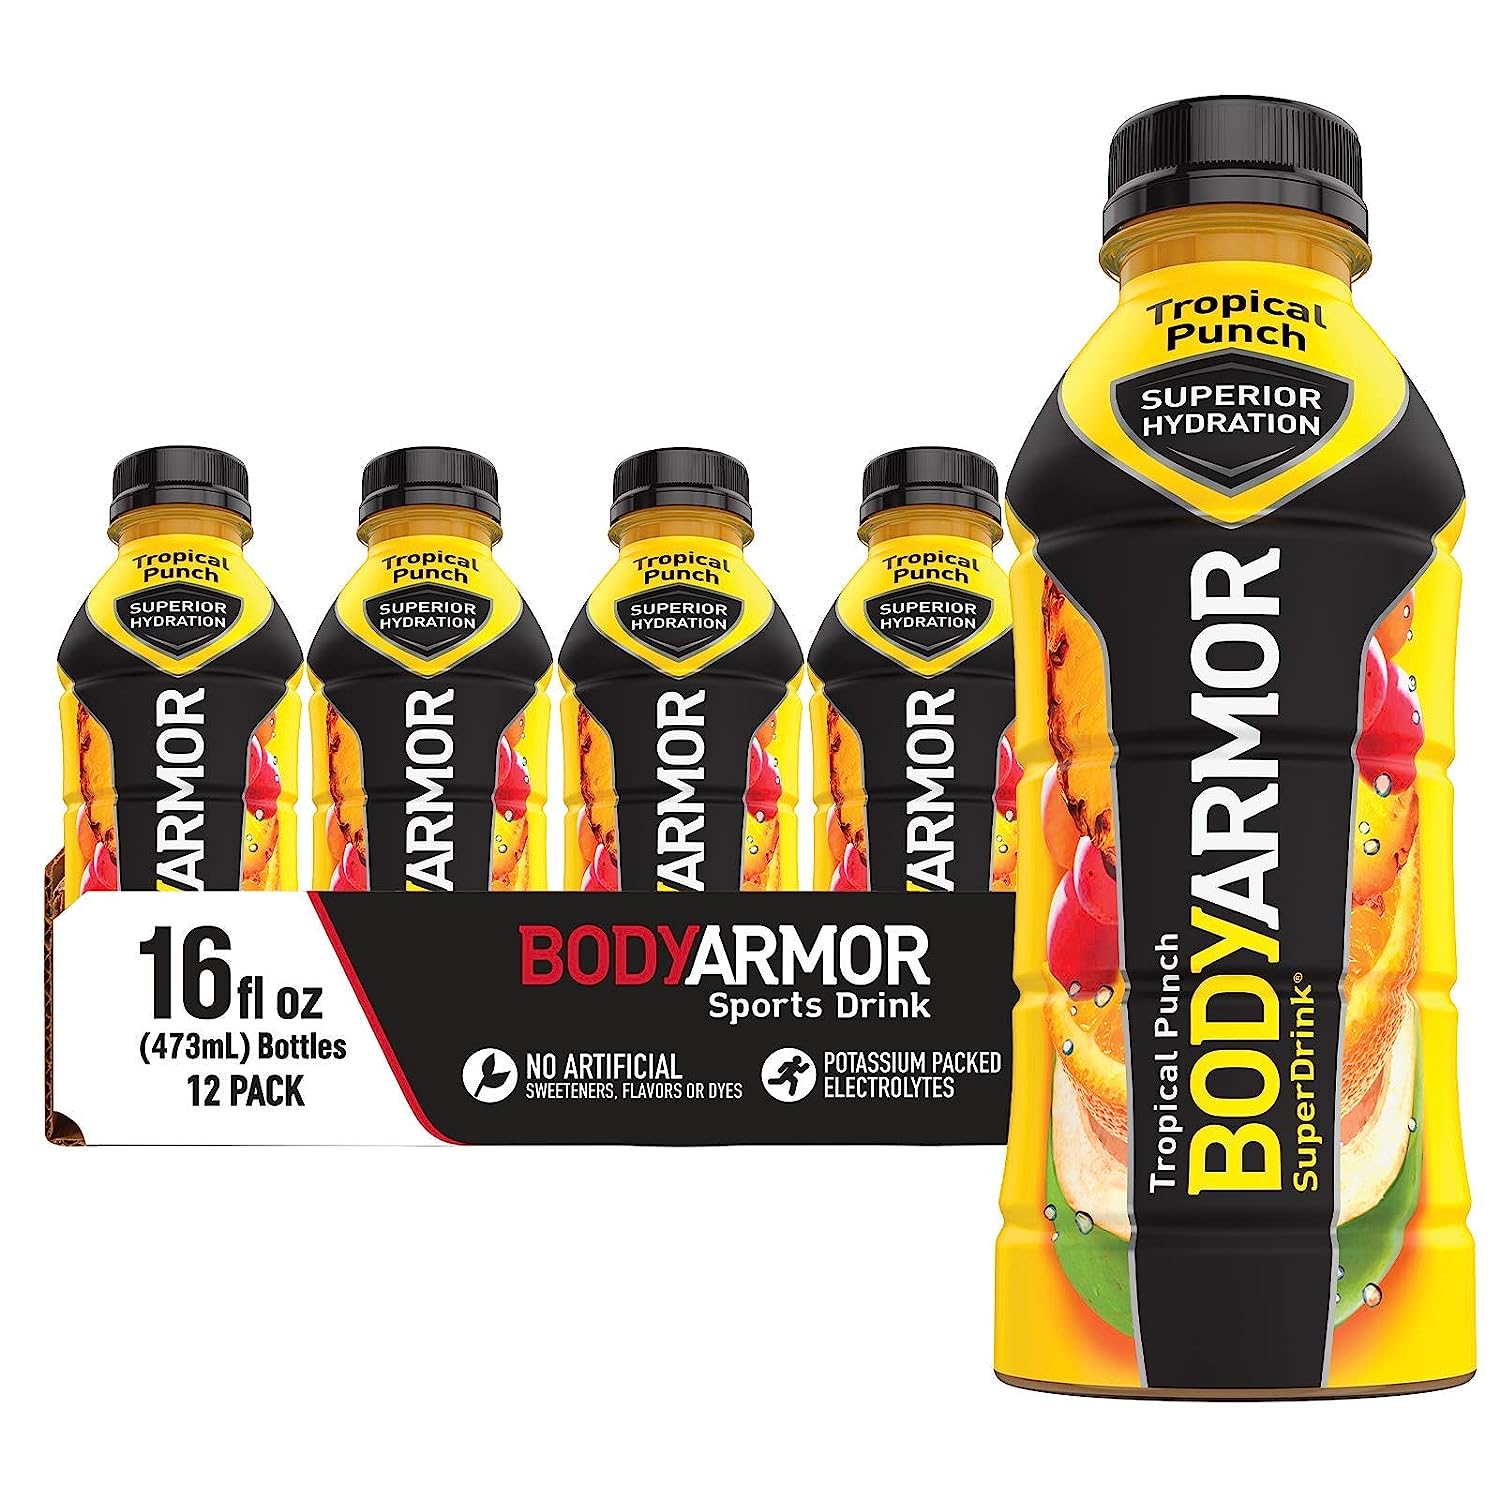 12-Pack 16-Oz BODYARMOR Sports Drink (Tropical Punch) $9.27 w/ S&S + Free Shipping w/ Prime or on $25+